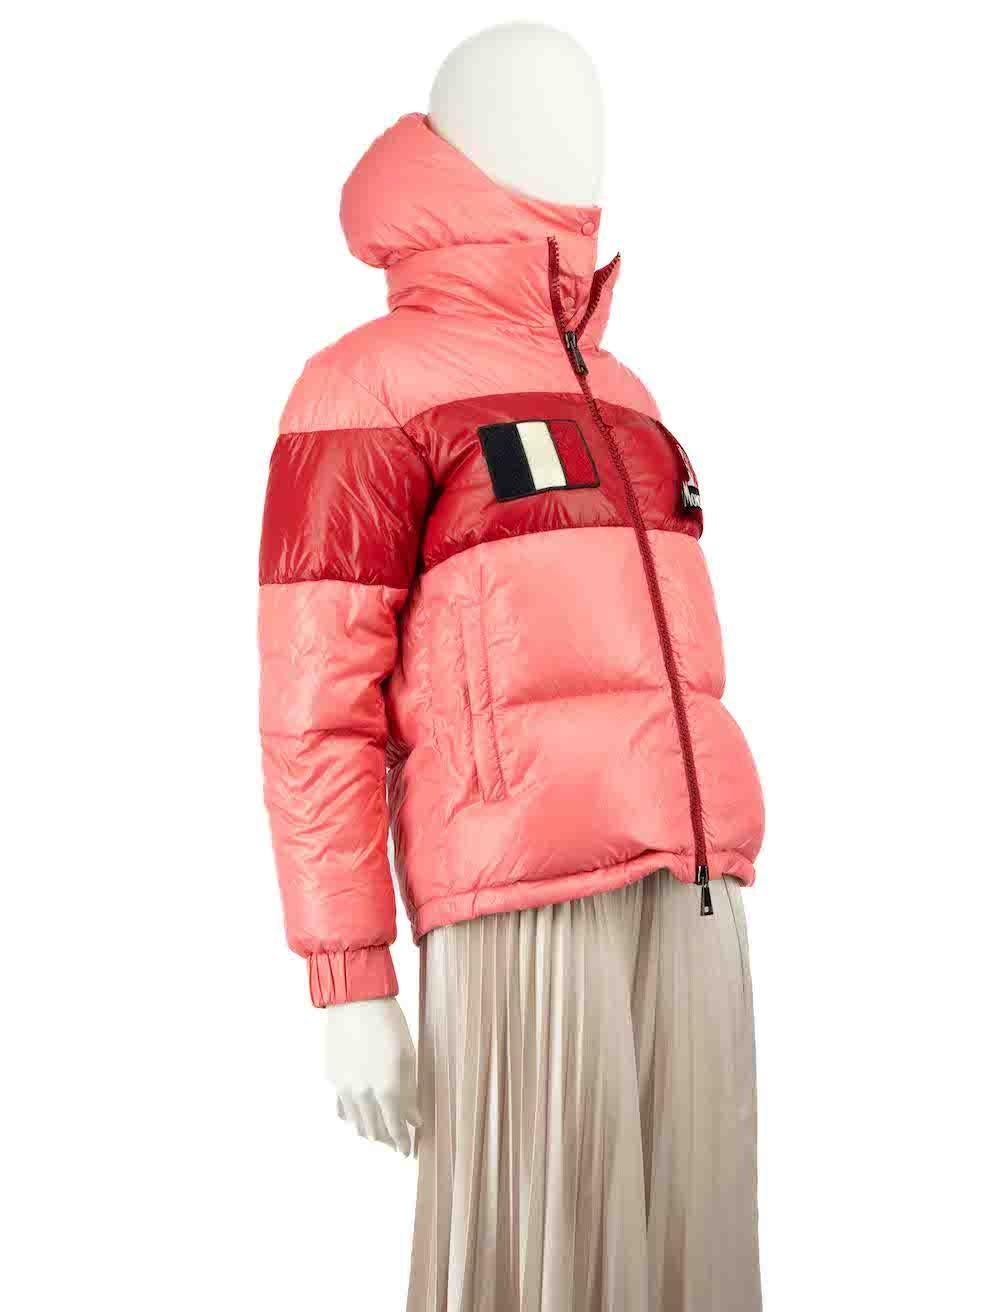 CONDITION is Very good. Hardly any visible wear to jacket is evident on this used Moncler designer resale item.
 
 
 
 Details
 
 
 Model: Gary
 
 Pink
 
 Synthetic
 
 Puffer jacket
 
 Goose down
 
 Detachable hood
 
 Red colour block
 
 Zip